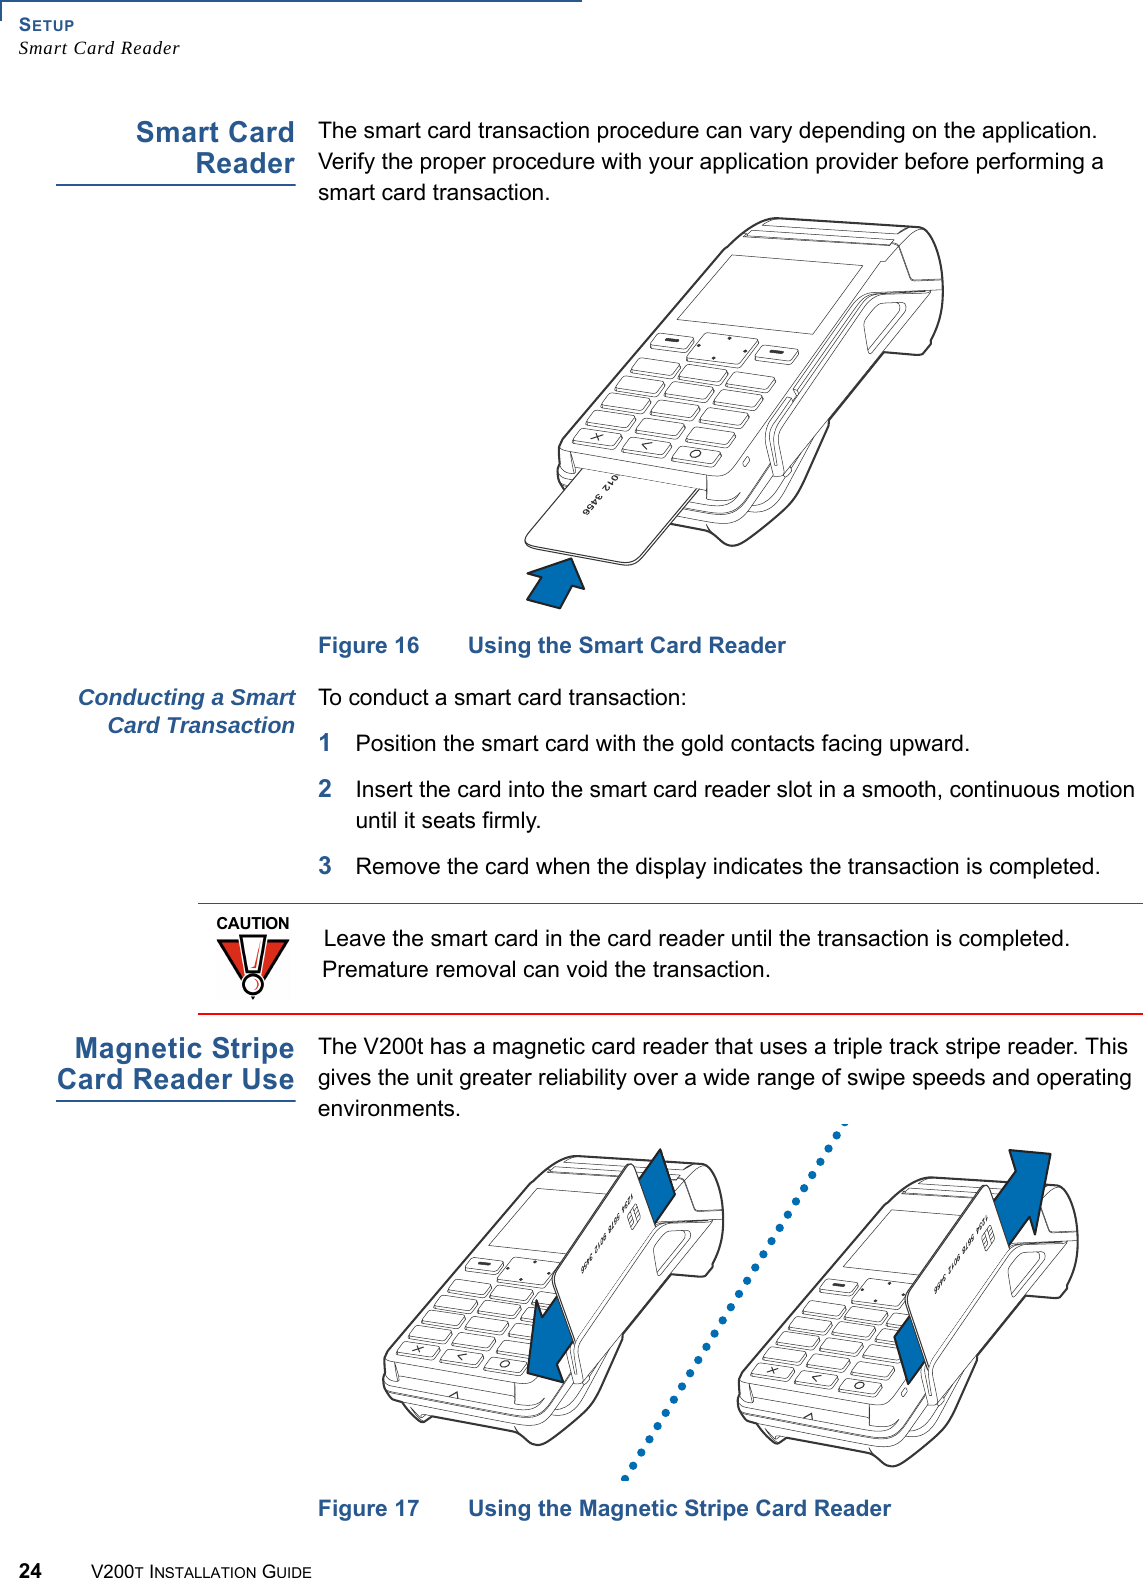 SETUPSmart Card Reader24 V200T INSTALLATION GUIDESmart CardReaderThe smart card transaction procedure can vary depending on the application. Verify the proper procedure with your application provider before performing a smart card transaction.Figure 16 Using the Smart Card ReaderConducting a SmartCard Transaction To conduct a smart card transaction:1Position the smart card with the gold contacts facing upward.2Insert the card into the smart card reader slot in a smooth, continuous motion until it seats firmly.3Remove the card when the display indicates the transaction is completed.Magnetic StripeCard Reader UseThe V200t has a magnetic card reader that uses a triple track stripe reader. This gives the unit greater reliability over a wide range of swipe speeds and operating environments.Figure 17 Using the Magnetic Stripe Card ReaderCAUTIONLeave the smart card in the card reader until the transaction is completed. Premature removal can void the transaction.